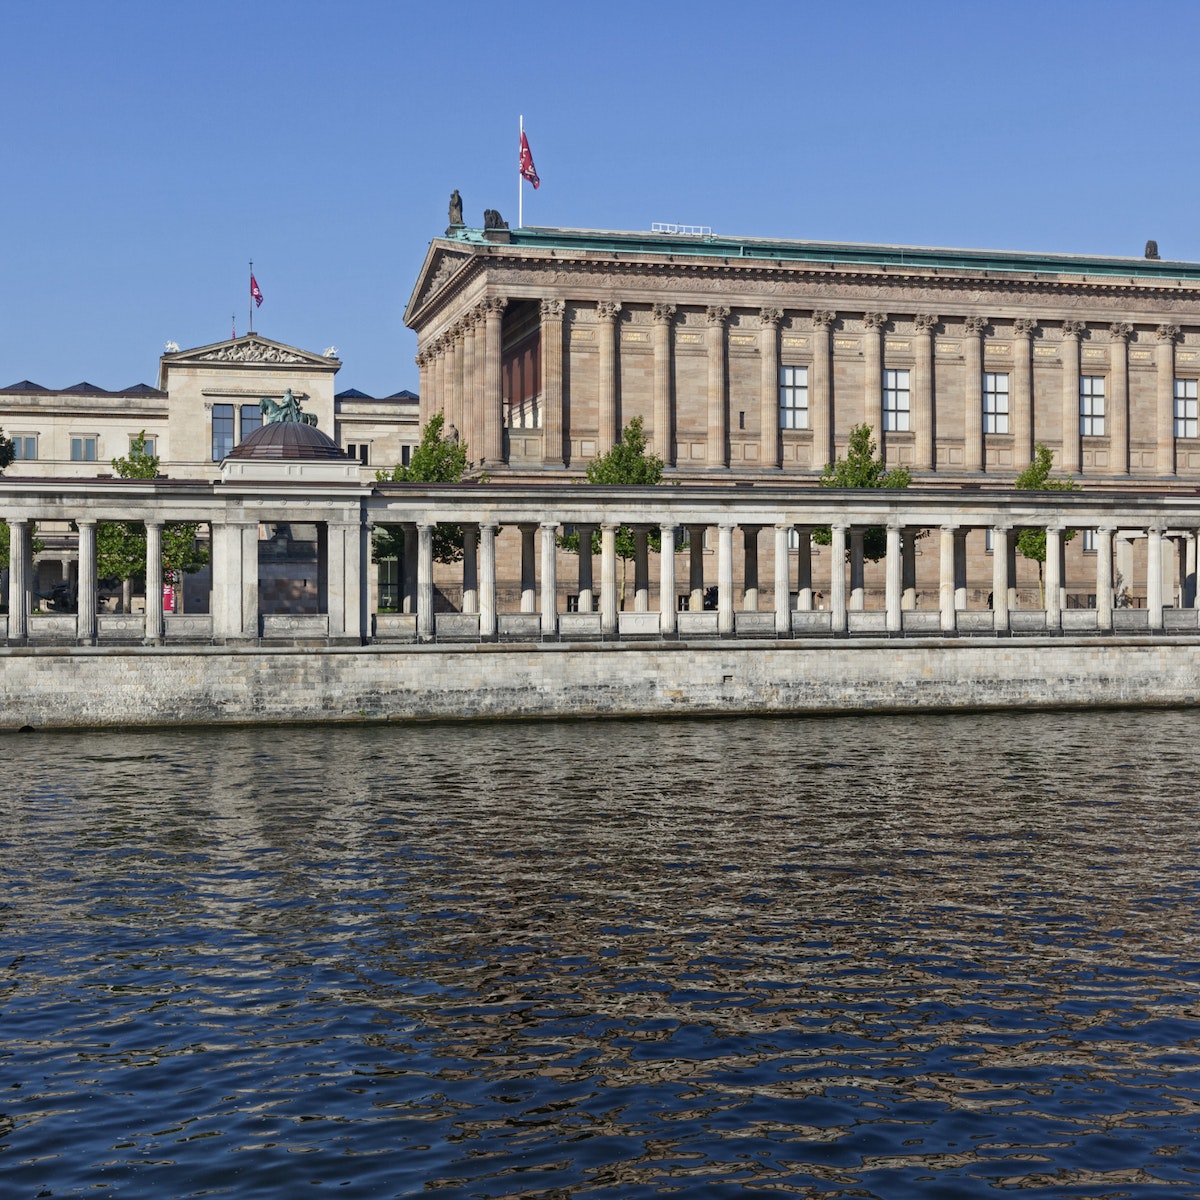 Altes Nationalgalerie colonnade by the River Spree